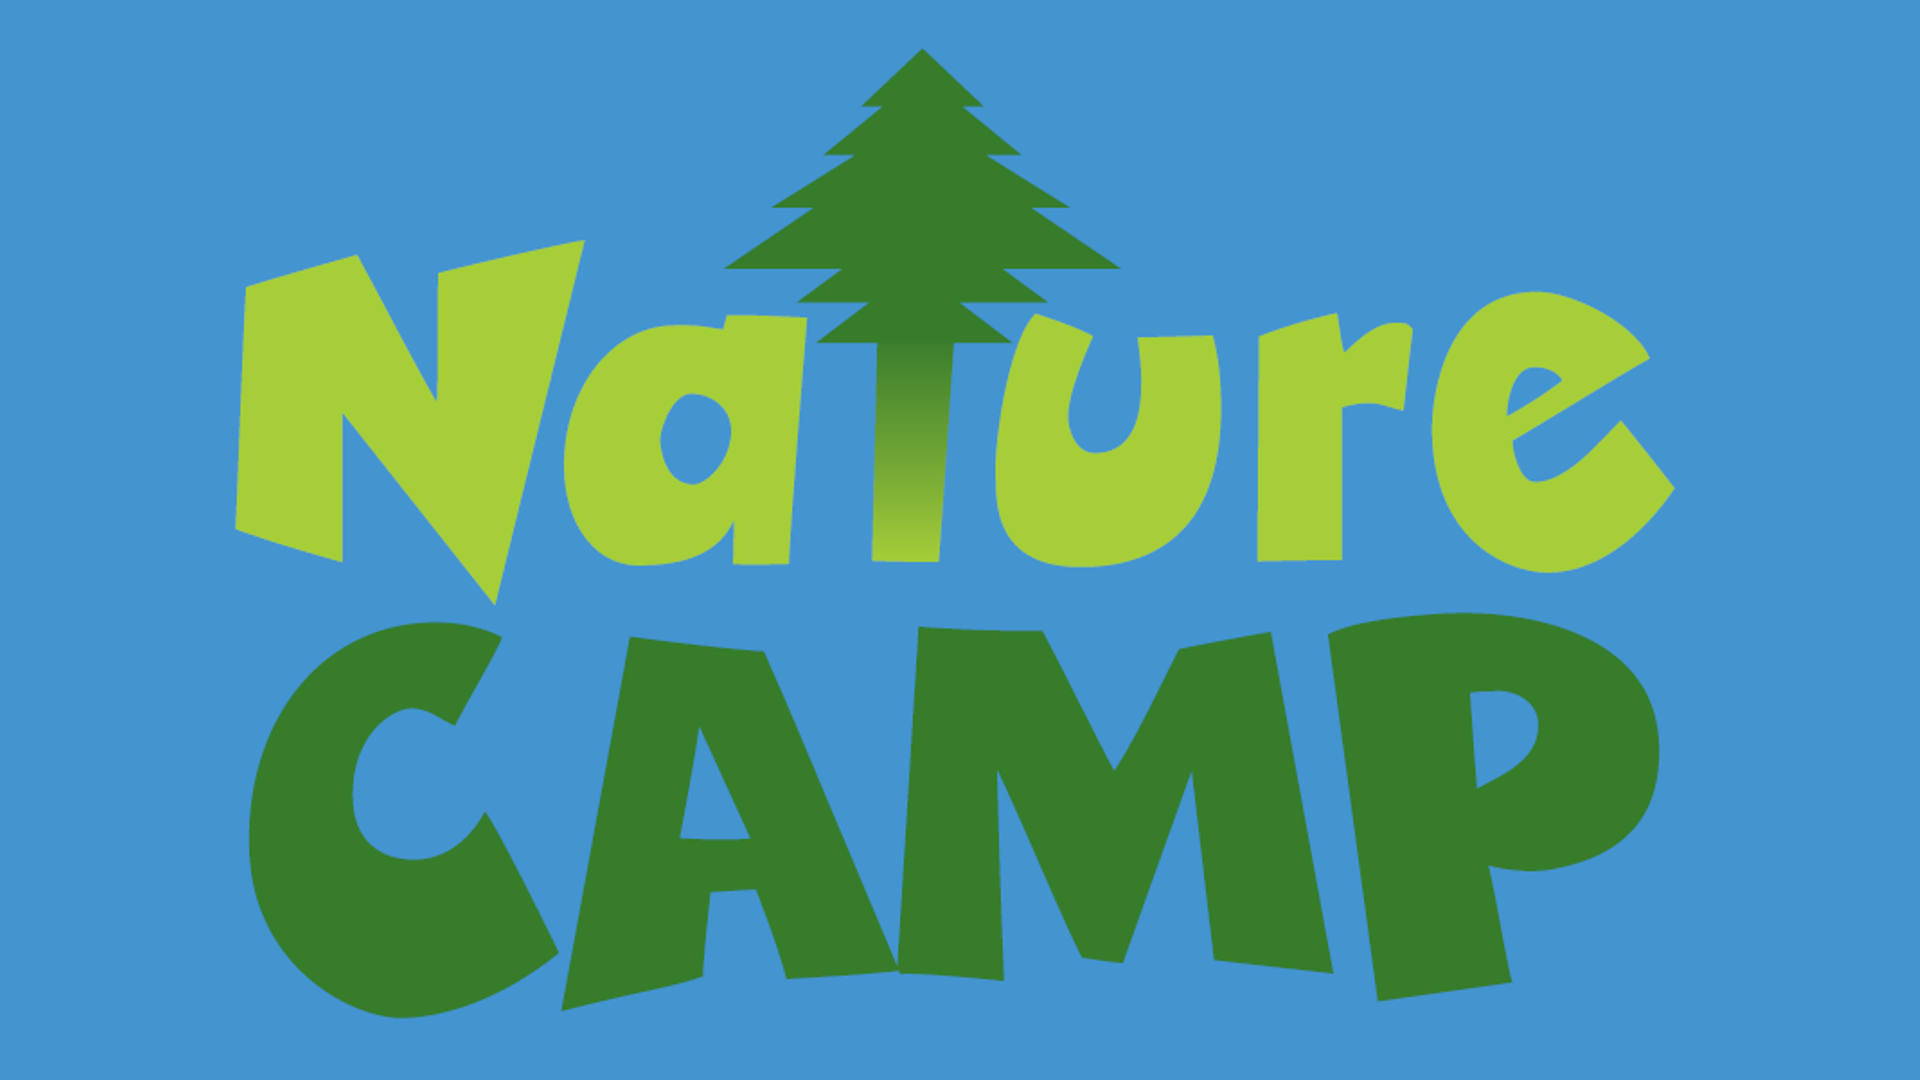 Life Cycle and Memory Game Instructions: Nature Camp, Ohio Learns 360